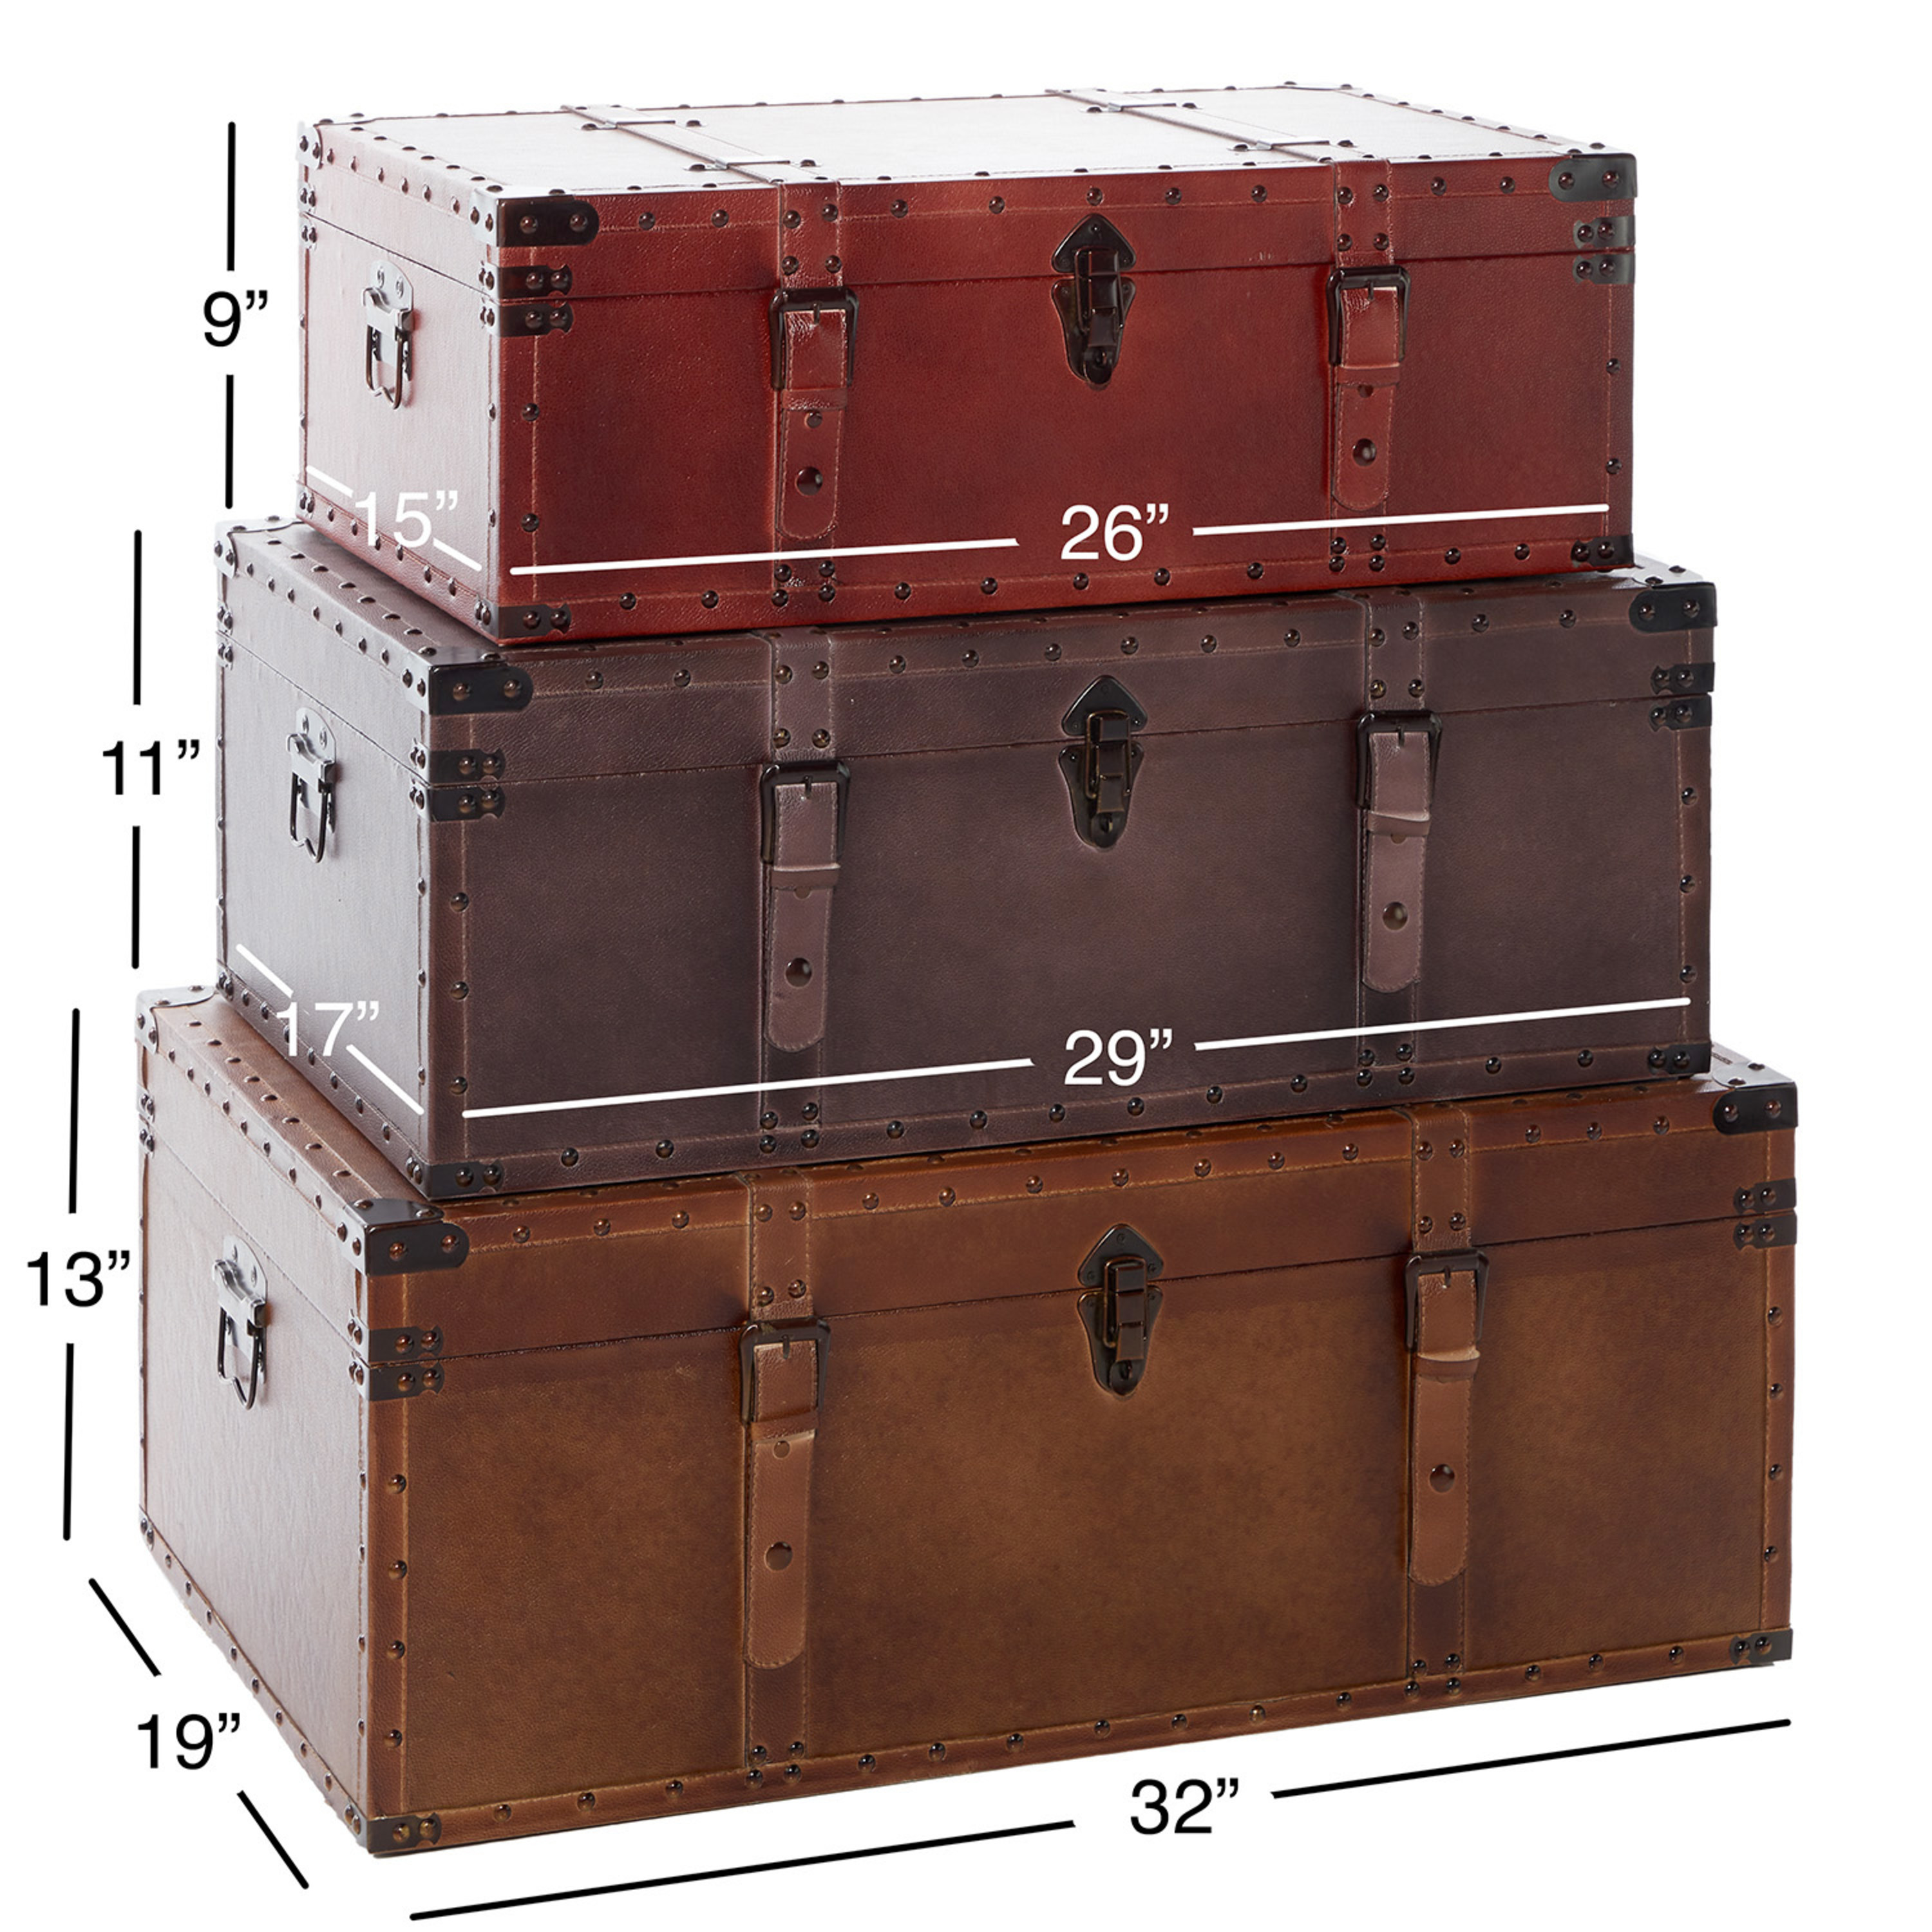 DecMode Rustic Wood Stacked Style Storage Trunk, Set of 3 32", 29", 26"W with Red, Taupe Brown, and Tan Finish - image 5 of 19